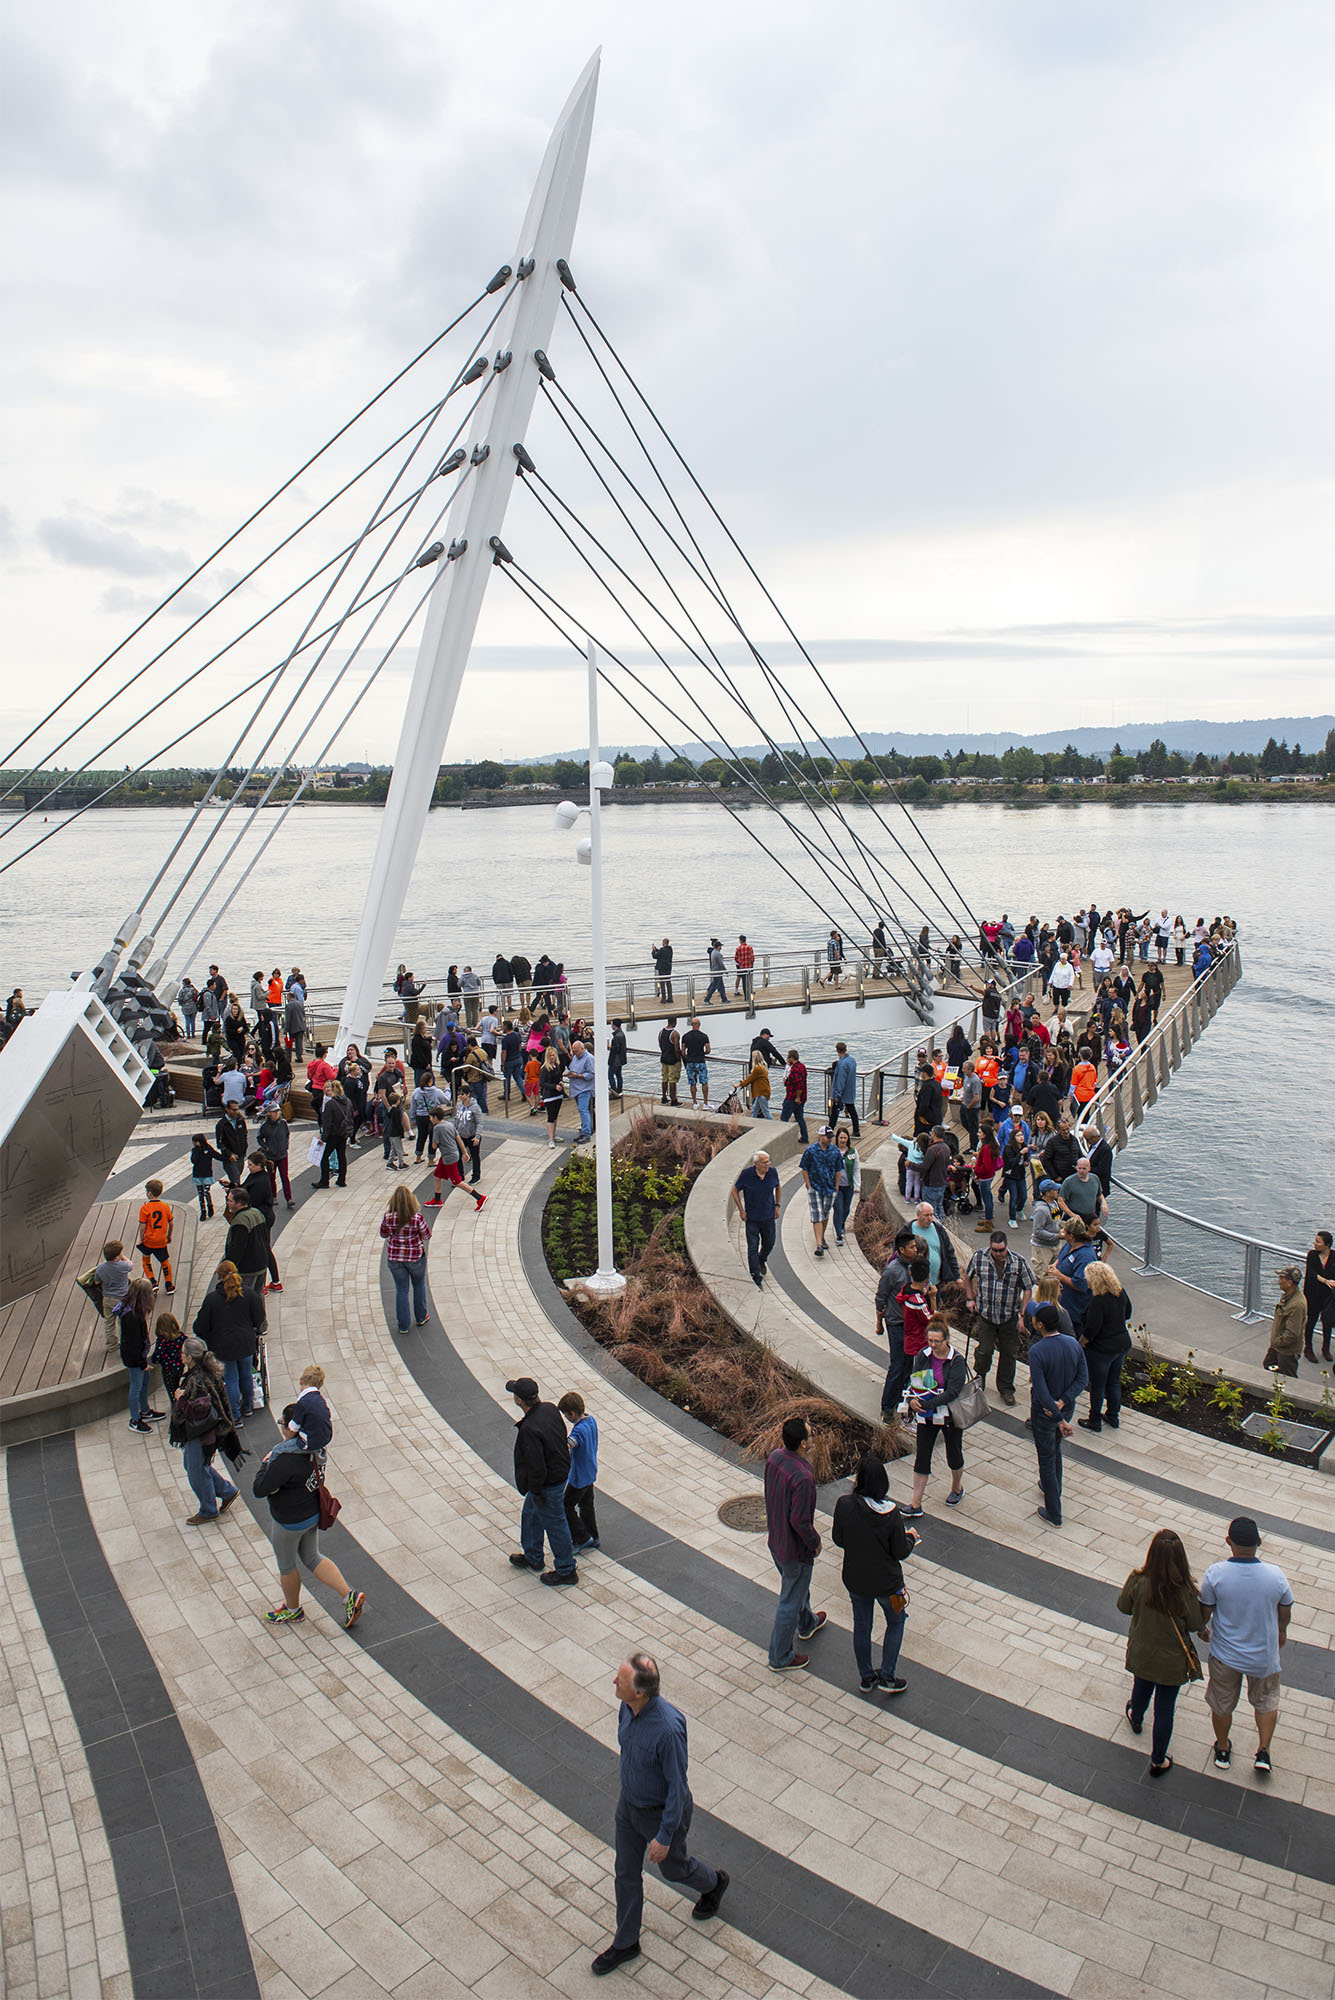 Attendees at the Vancouver Waterfront Park grand opening explore the Grant Street Pier on Saturday afternoon, Sept. 29, 2018.